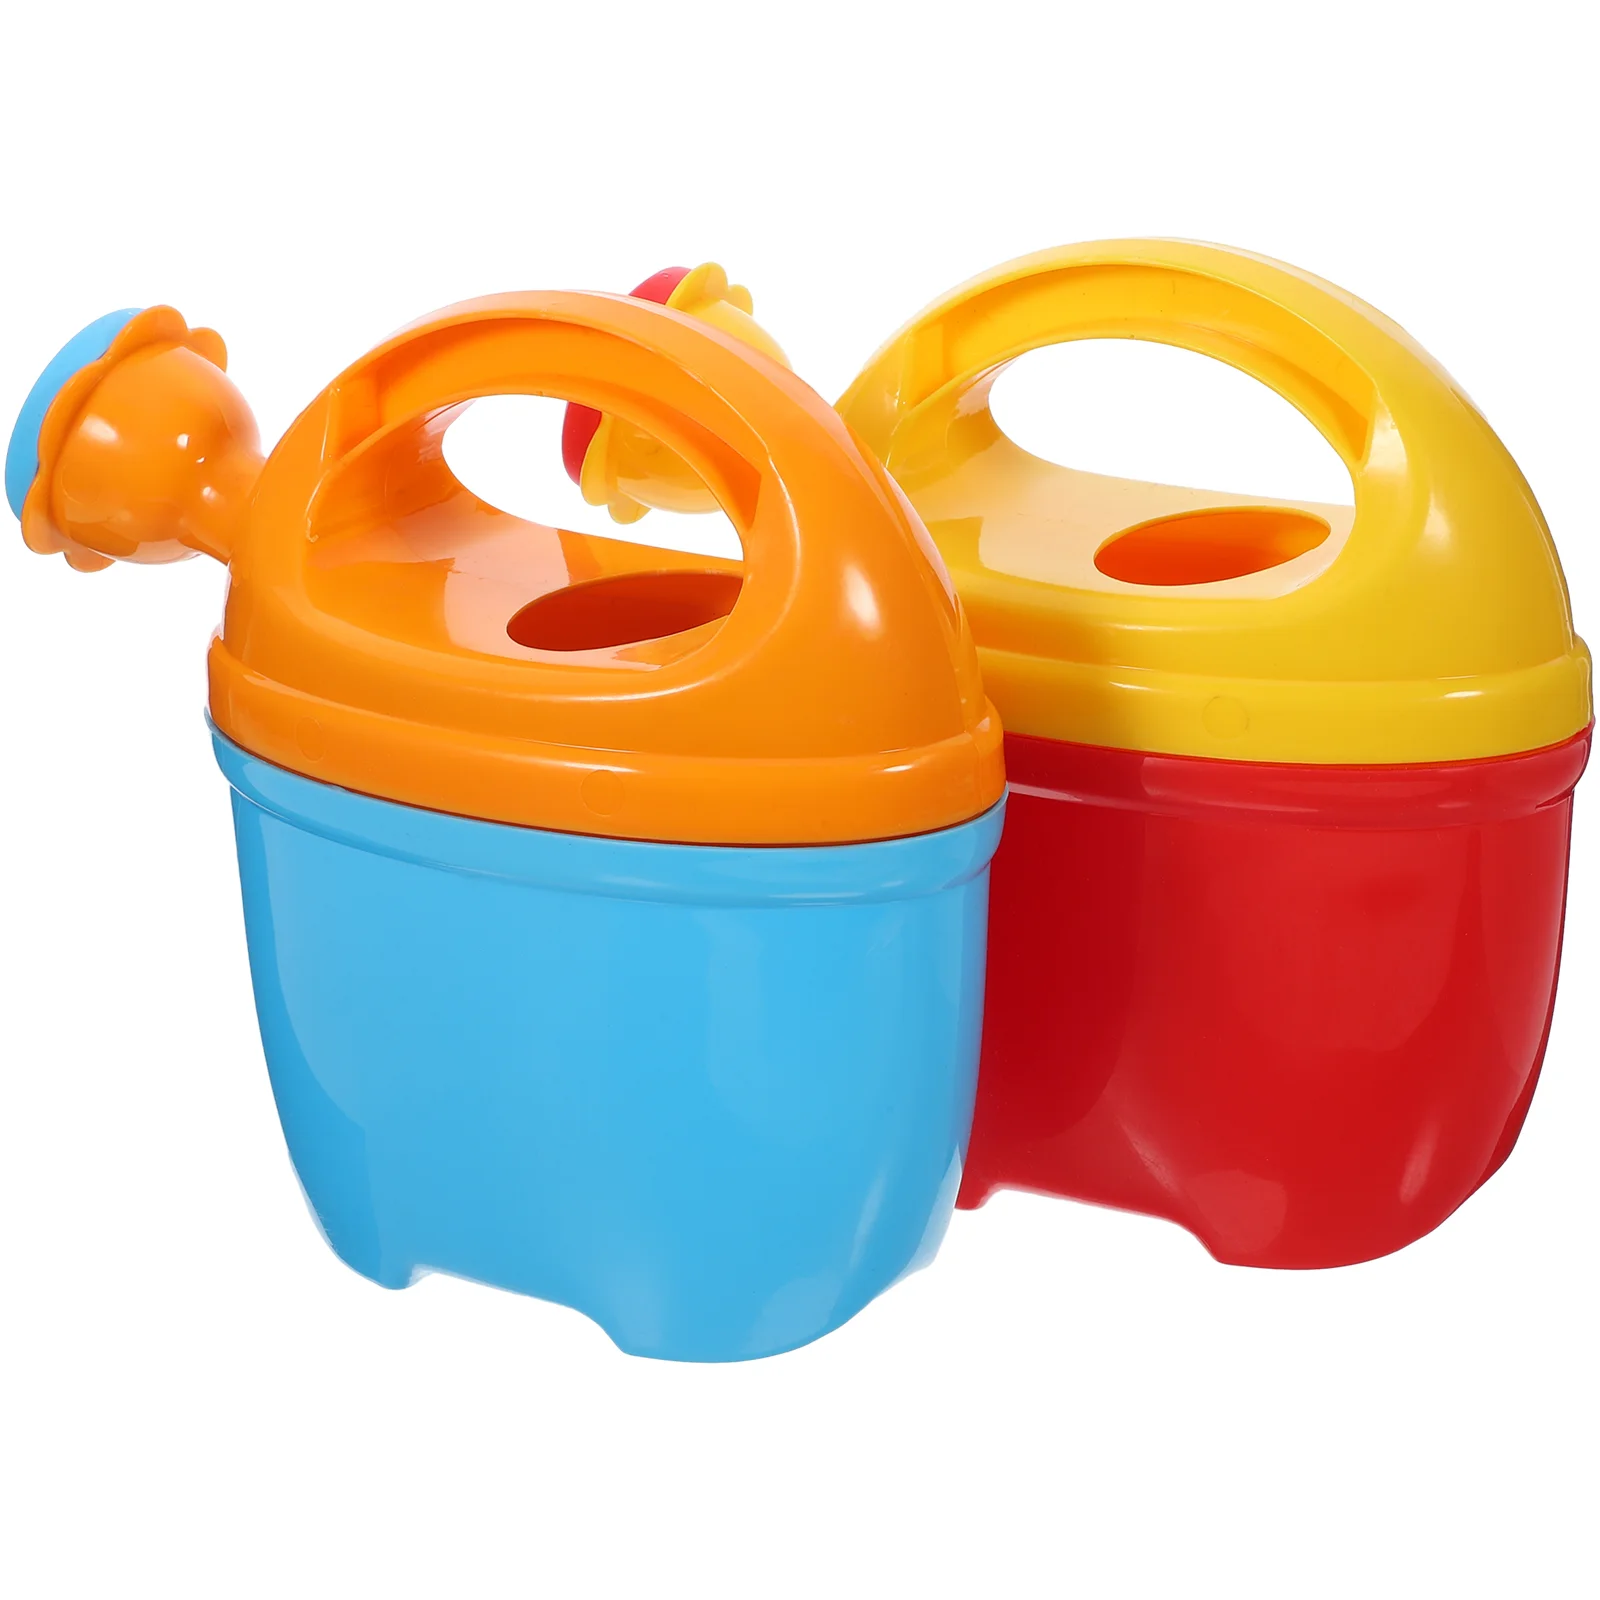 

Watering Bottle Toy Cans for Boys Mini Pot Small Watering Can Kids Summer Bathing Plastic Small Flower Shower Outdoor Playset